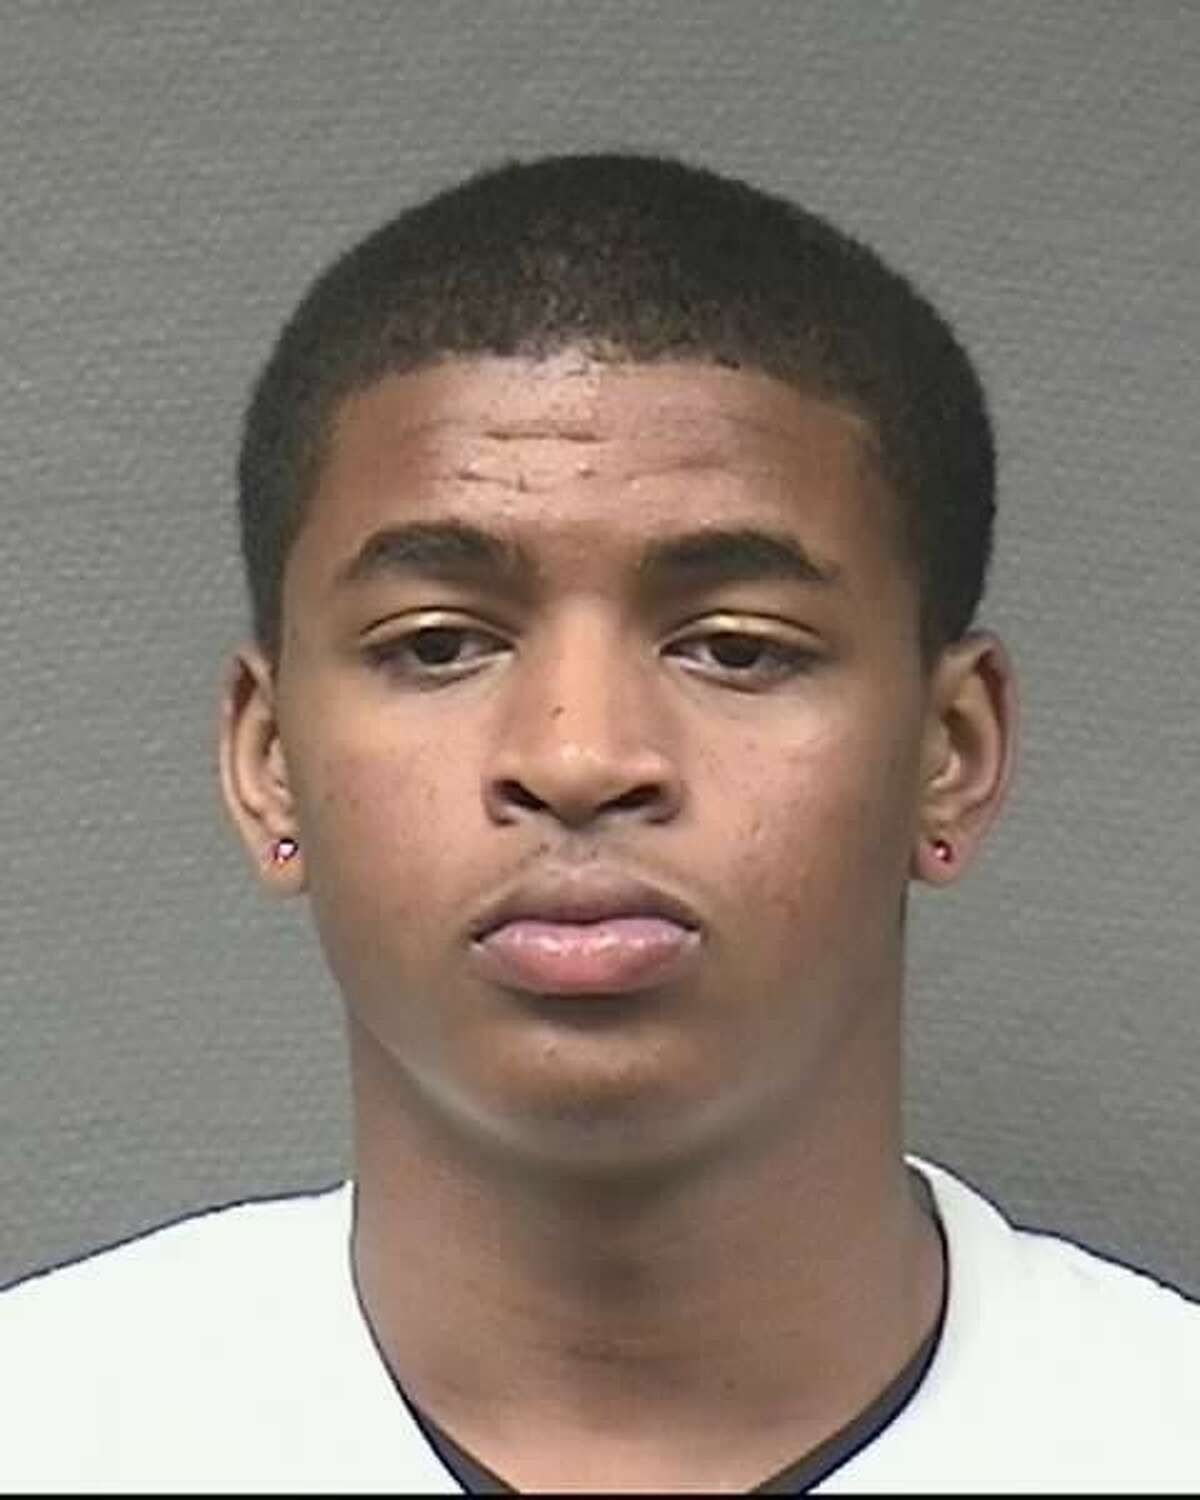 Harris County Sheriffs Office Wanted Fugitives Of The Week